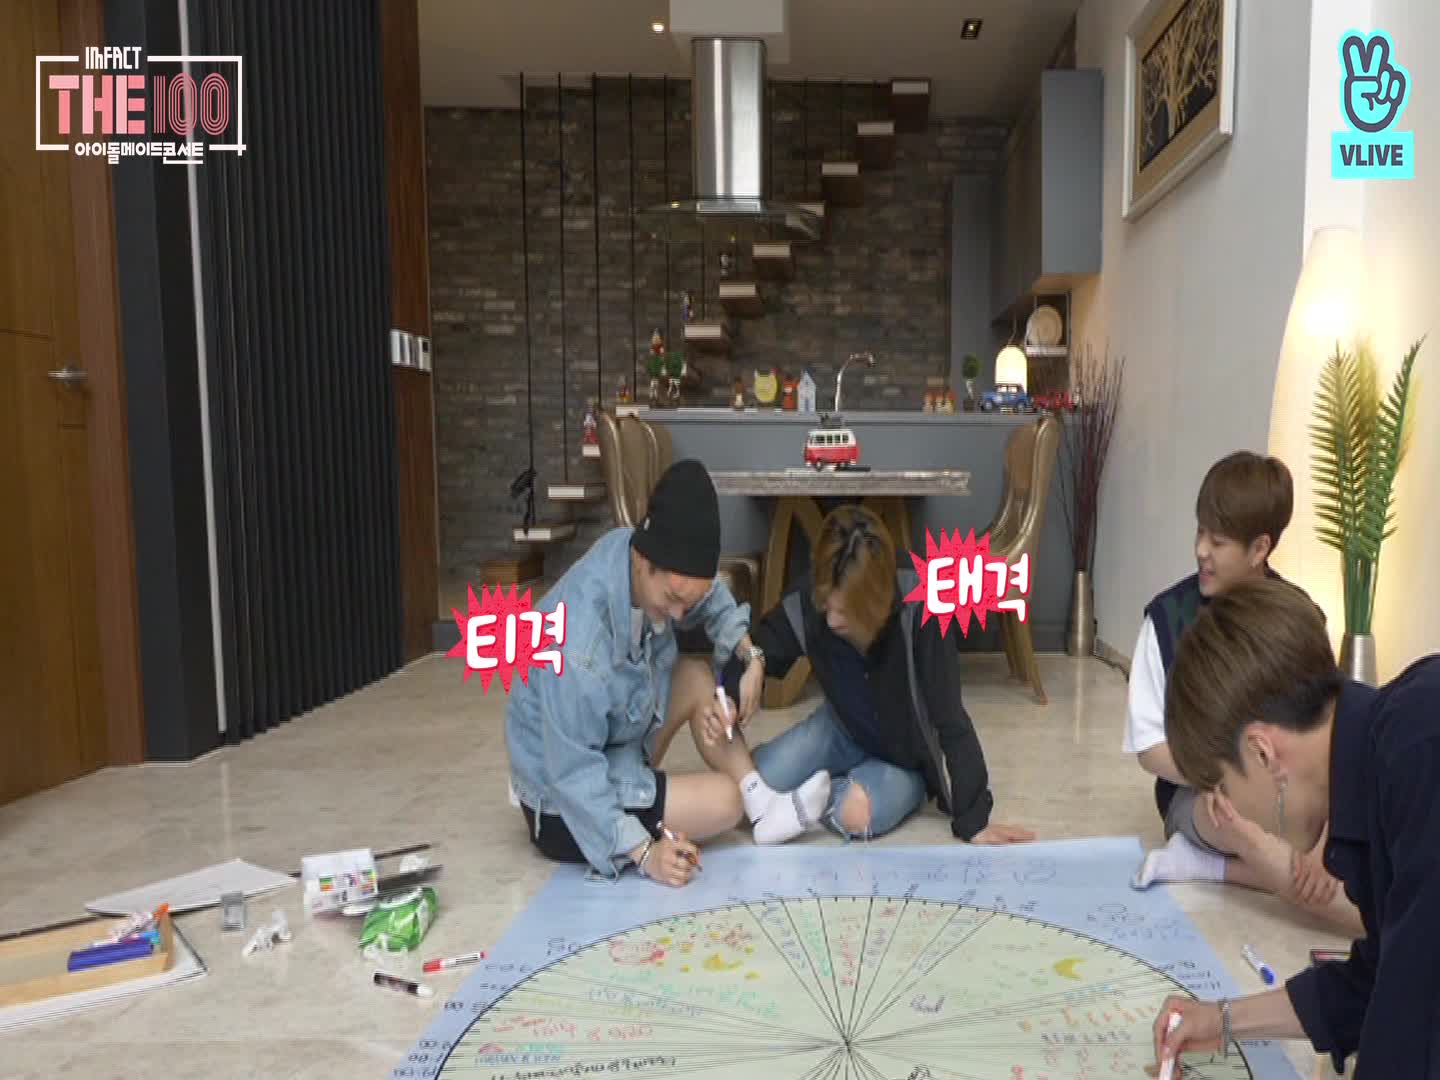 [THE100_IMFACT] How does IMFACT want 100 hours to be? - 임팩트가 꿈꾸는 100시간은? Ep 4.